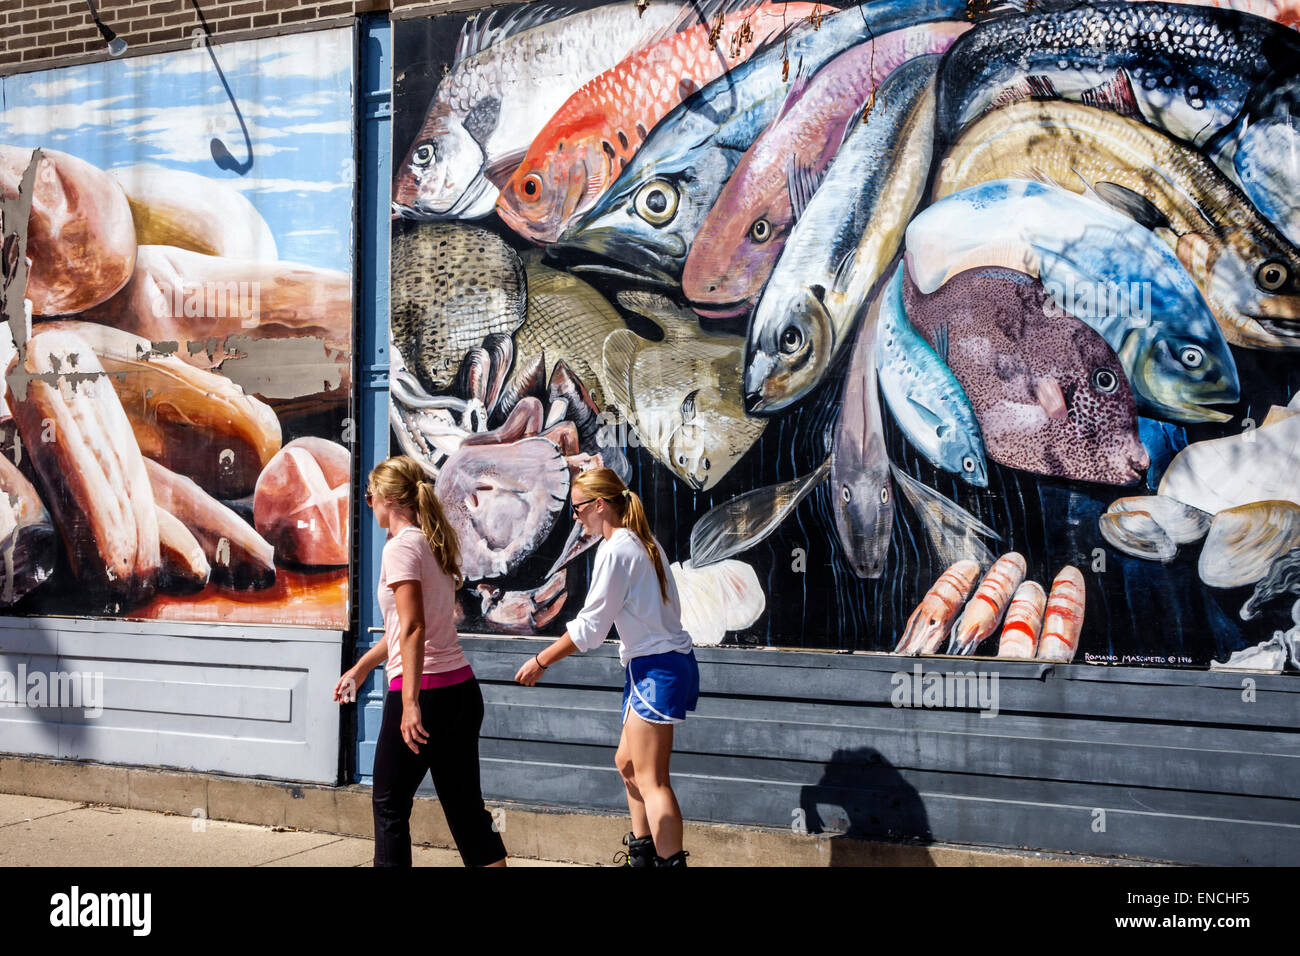 Chicago Illinois,North Side,Lincoln Park,neighborhood,community area,Carnival Finer Foods,grocery store,sidewalk,mural,fish,adult adults woman women f Stock Photo